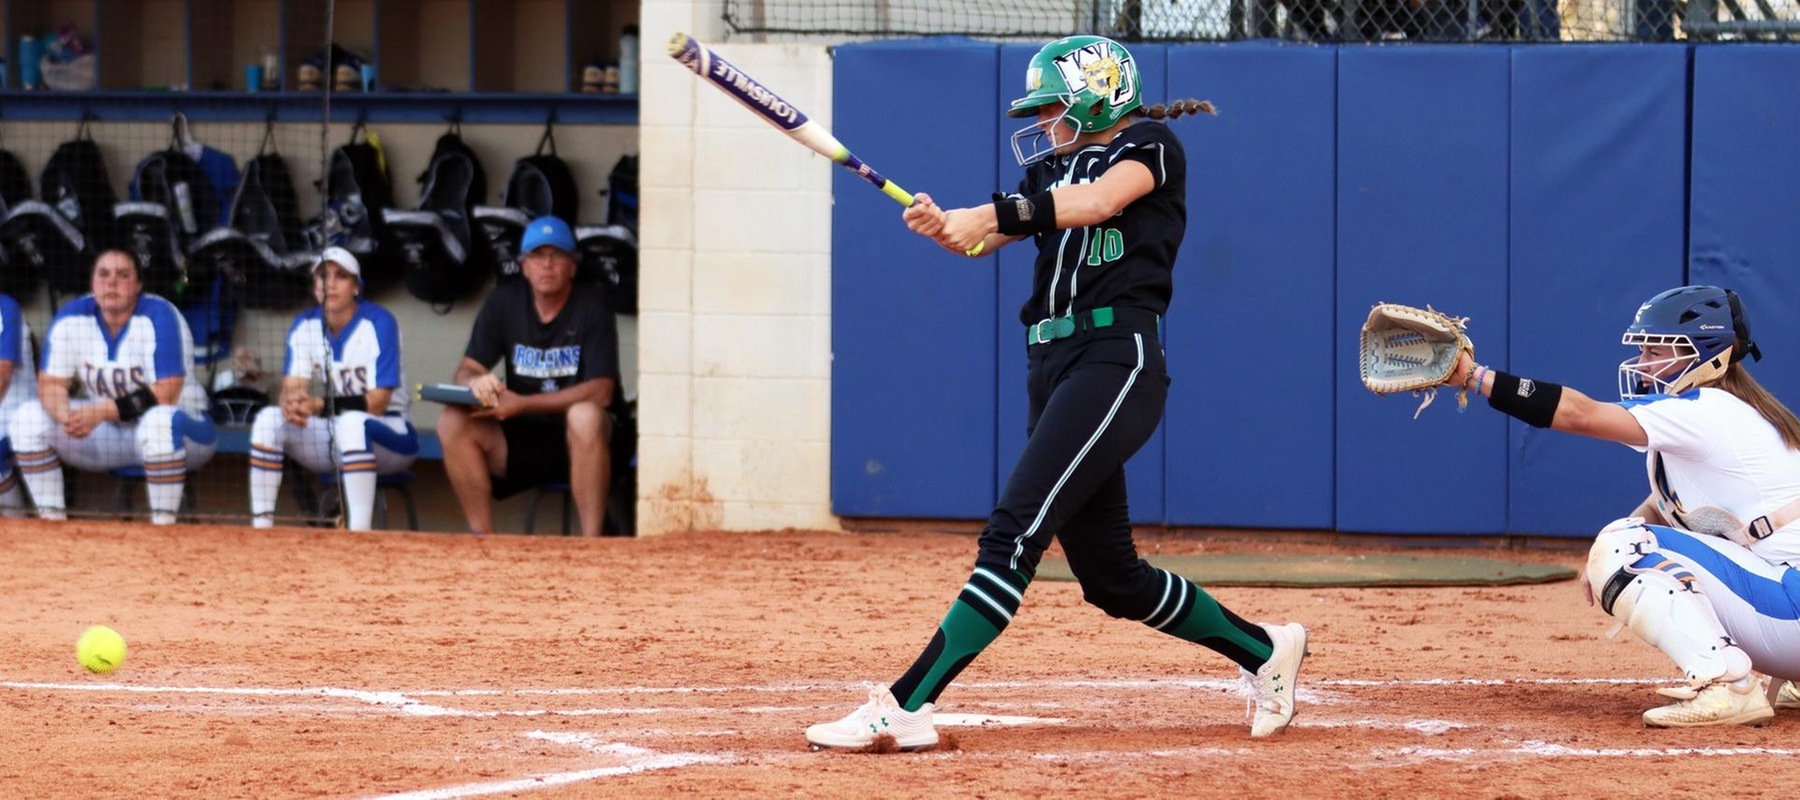 File photo of Sara Miller who went 3-for-4 with a double and a triple in game two at Molloy. Copyright 2020. Wilmington University. All rights reserved. Photo by Mary Kate Rumbaugh. March 2, 2020 vs. Rollins College in Winter Park, Florida.